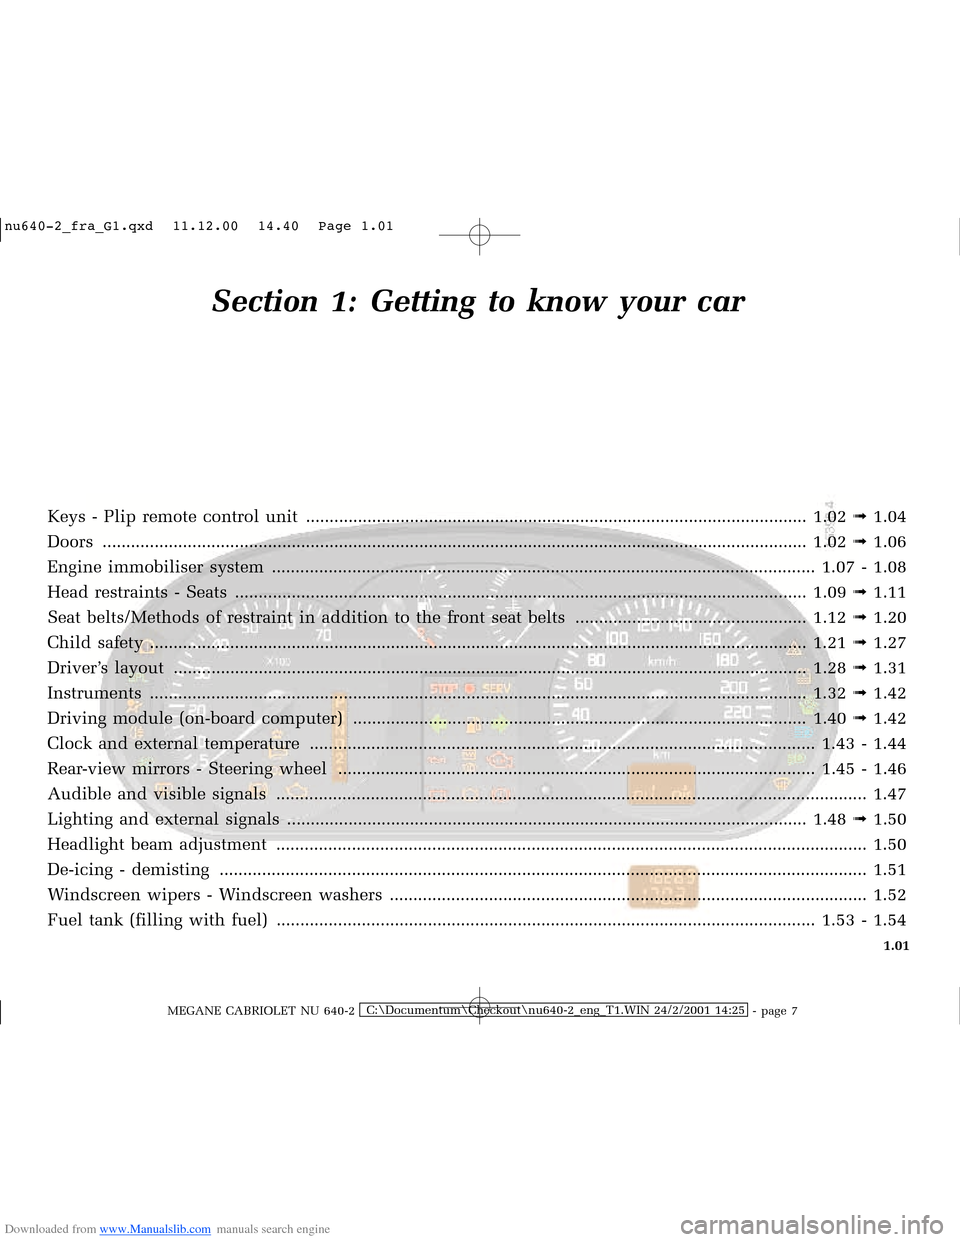 RENAULT MEGANE 2000 X64 / 1.G Owners Manual Downloaded from www.Manualslib.com manuals search engine �Q�X������B�I�U�D�B�*���T�[�G� � ��������� � ������ � �3�D�J�H� ����
MEGANE CABRIOLET NU 640-2C:\Documentum\Chec